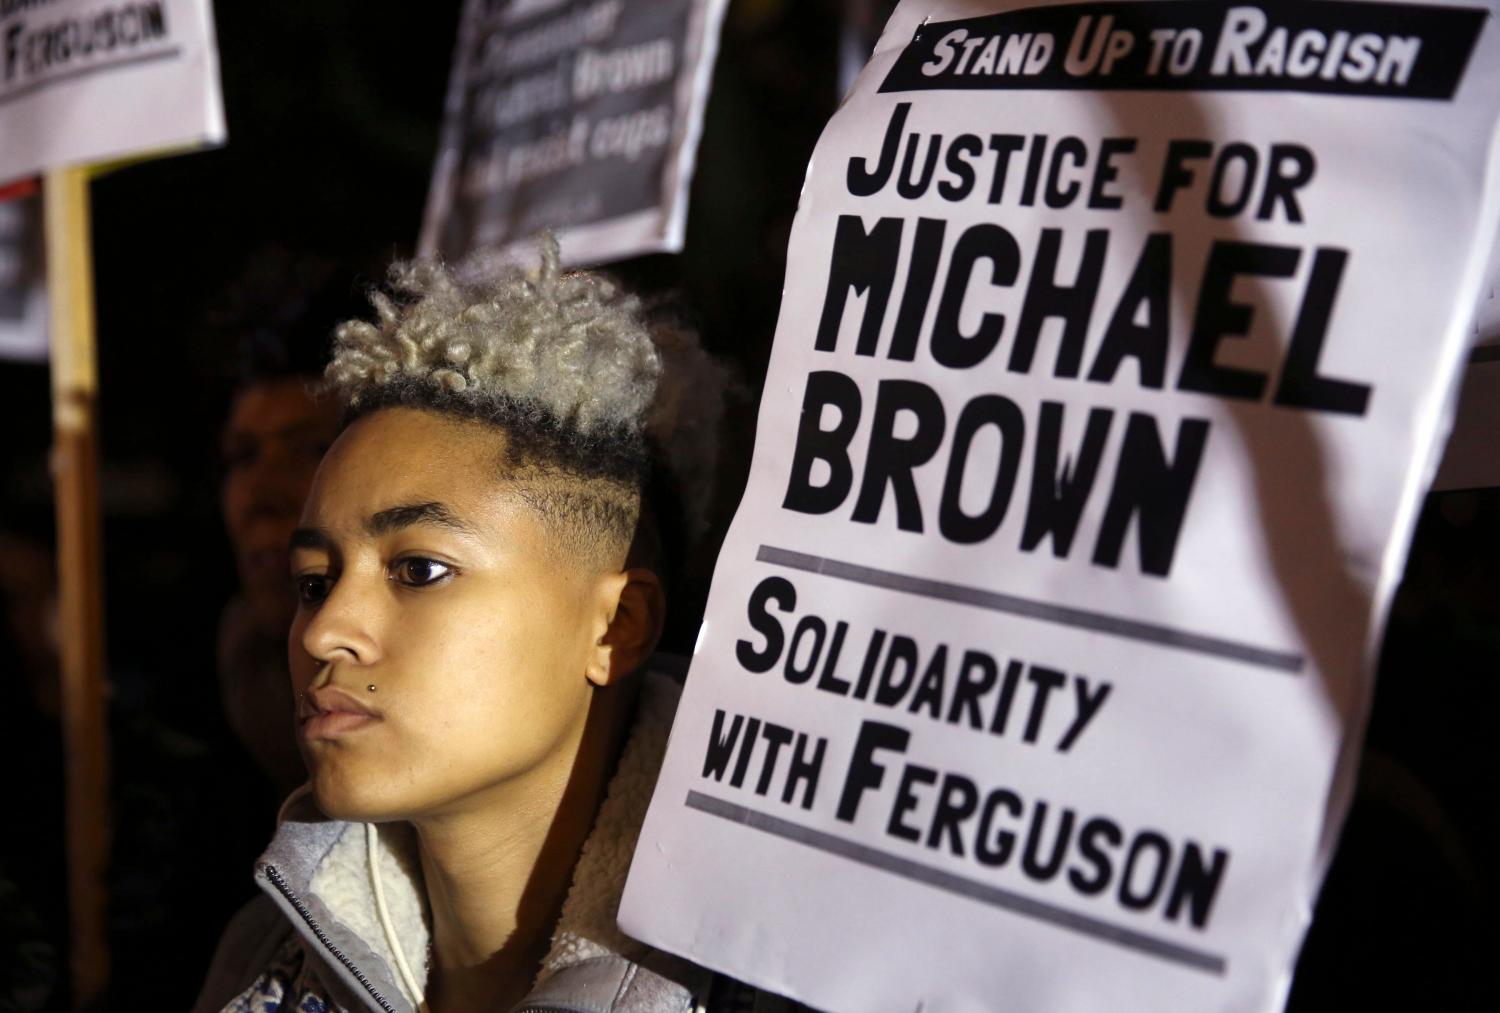 A demonstrator takes part in a protest to show solidarity with the family of black teenager Michael Brown.